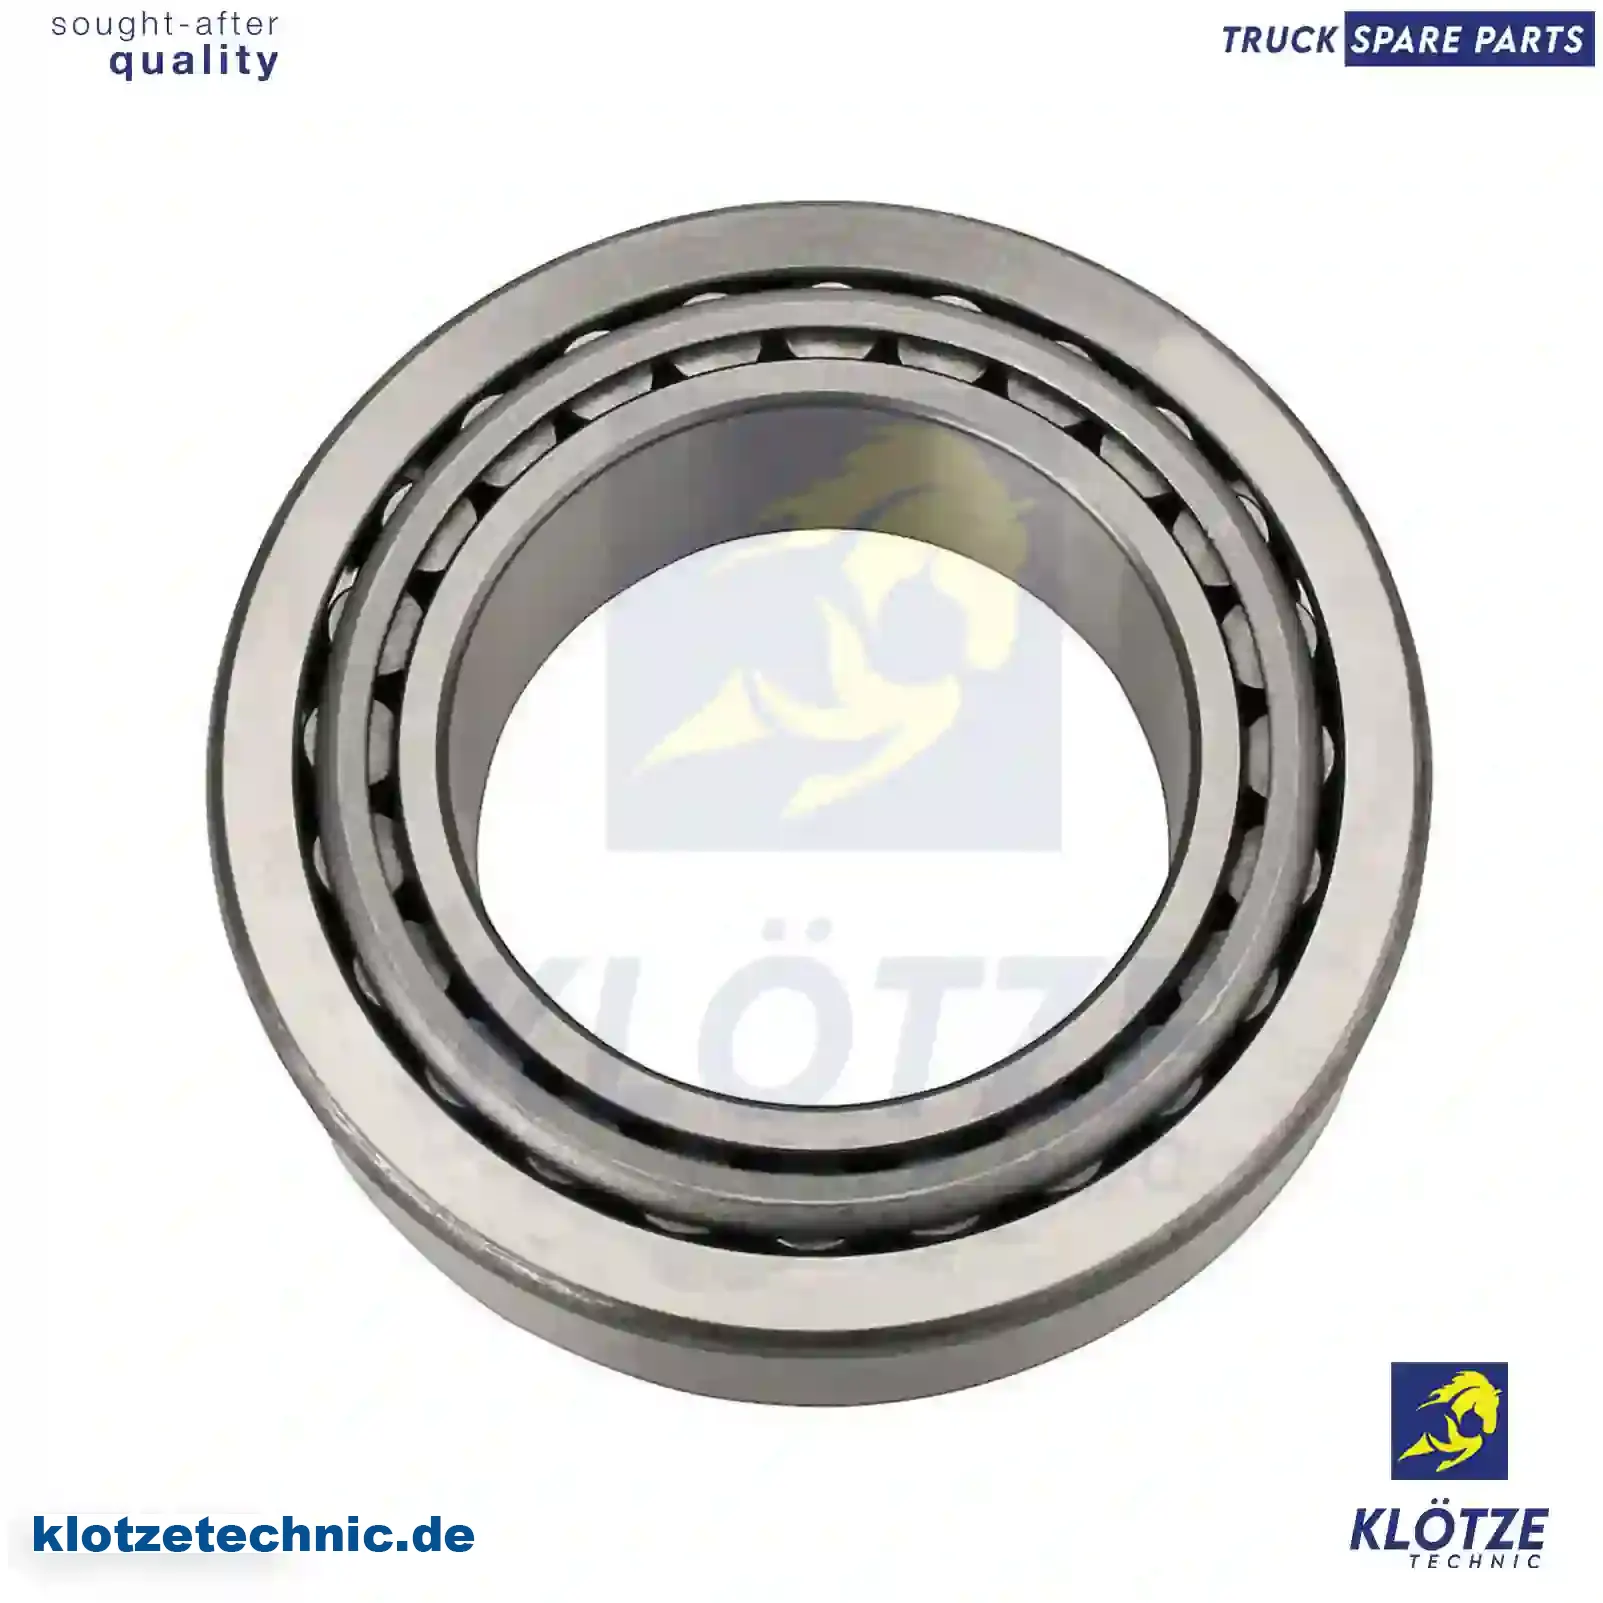 Tapered roller bearing, 0221664, 221664, 5000788406, 06324990040, 06324990131, 06324990189, 81934200270, 0009814218, 0039813005, 0039813205, 0089810305, 43210-D930A, 0023433115, 5000788406, 184678, ZG03011-0008